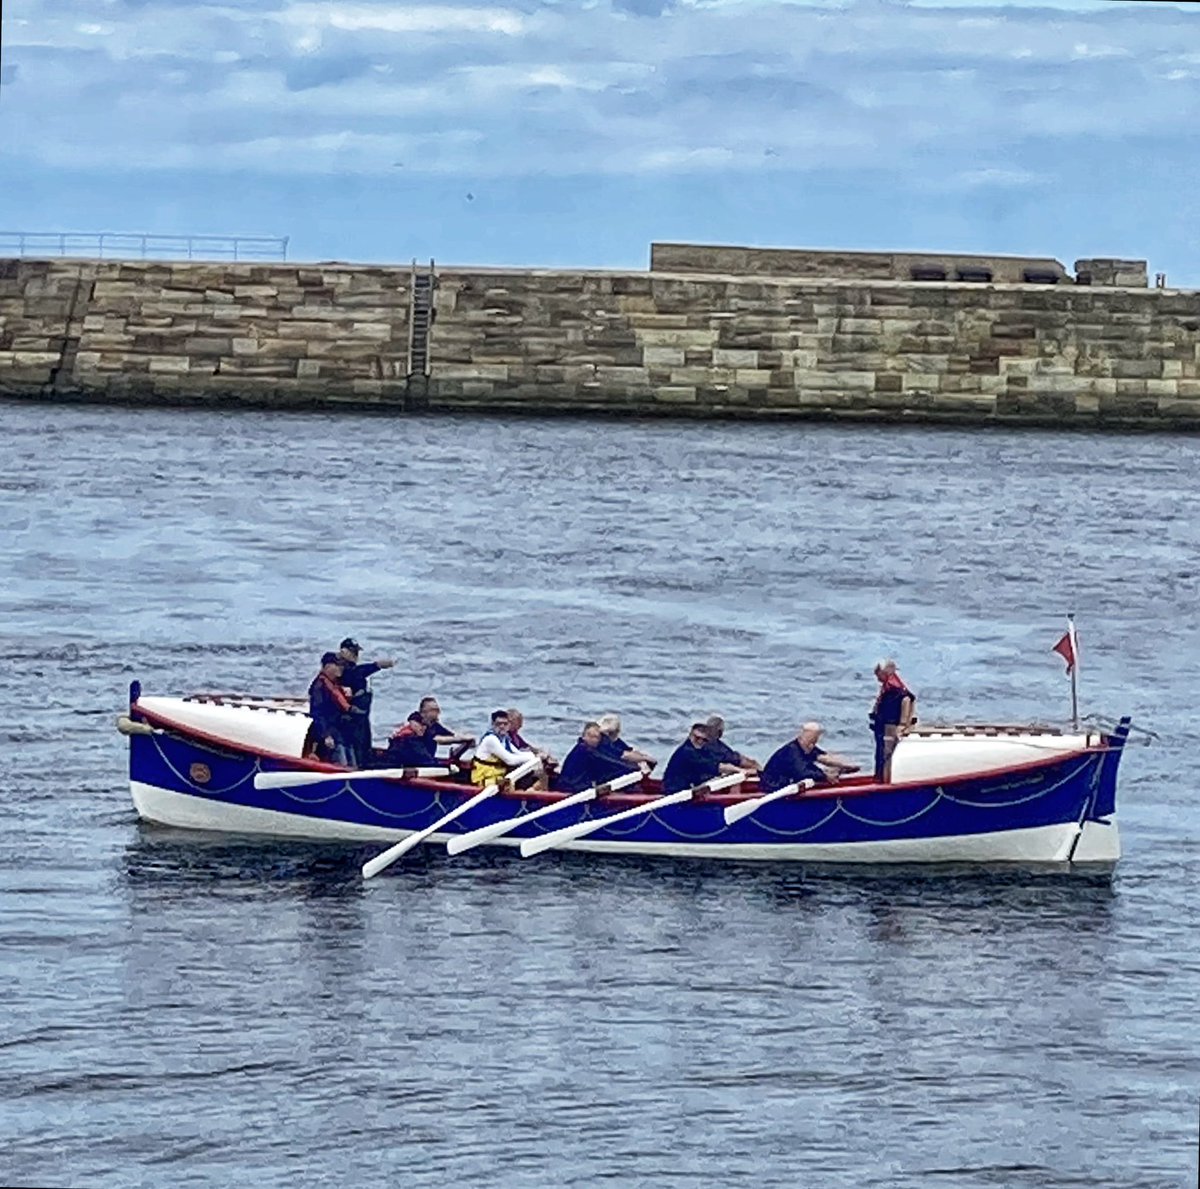 Whitby RNLI lifeboat display as part of its flag weekend, great to see Lois-Ivan 13-49 ( big Stu’s boat ! ) & have a cheeky pint in The Ship - Whitby 🍺#rnli #rnliwhitby #rnliwhitbylifeboat #theshipwhitby #lifesavers #whitby #northyorkshirecoast #whitbynorthyorkshire #coast #sea